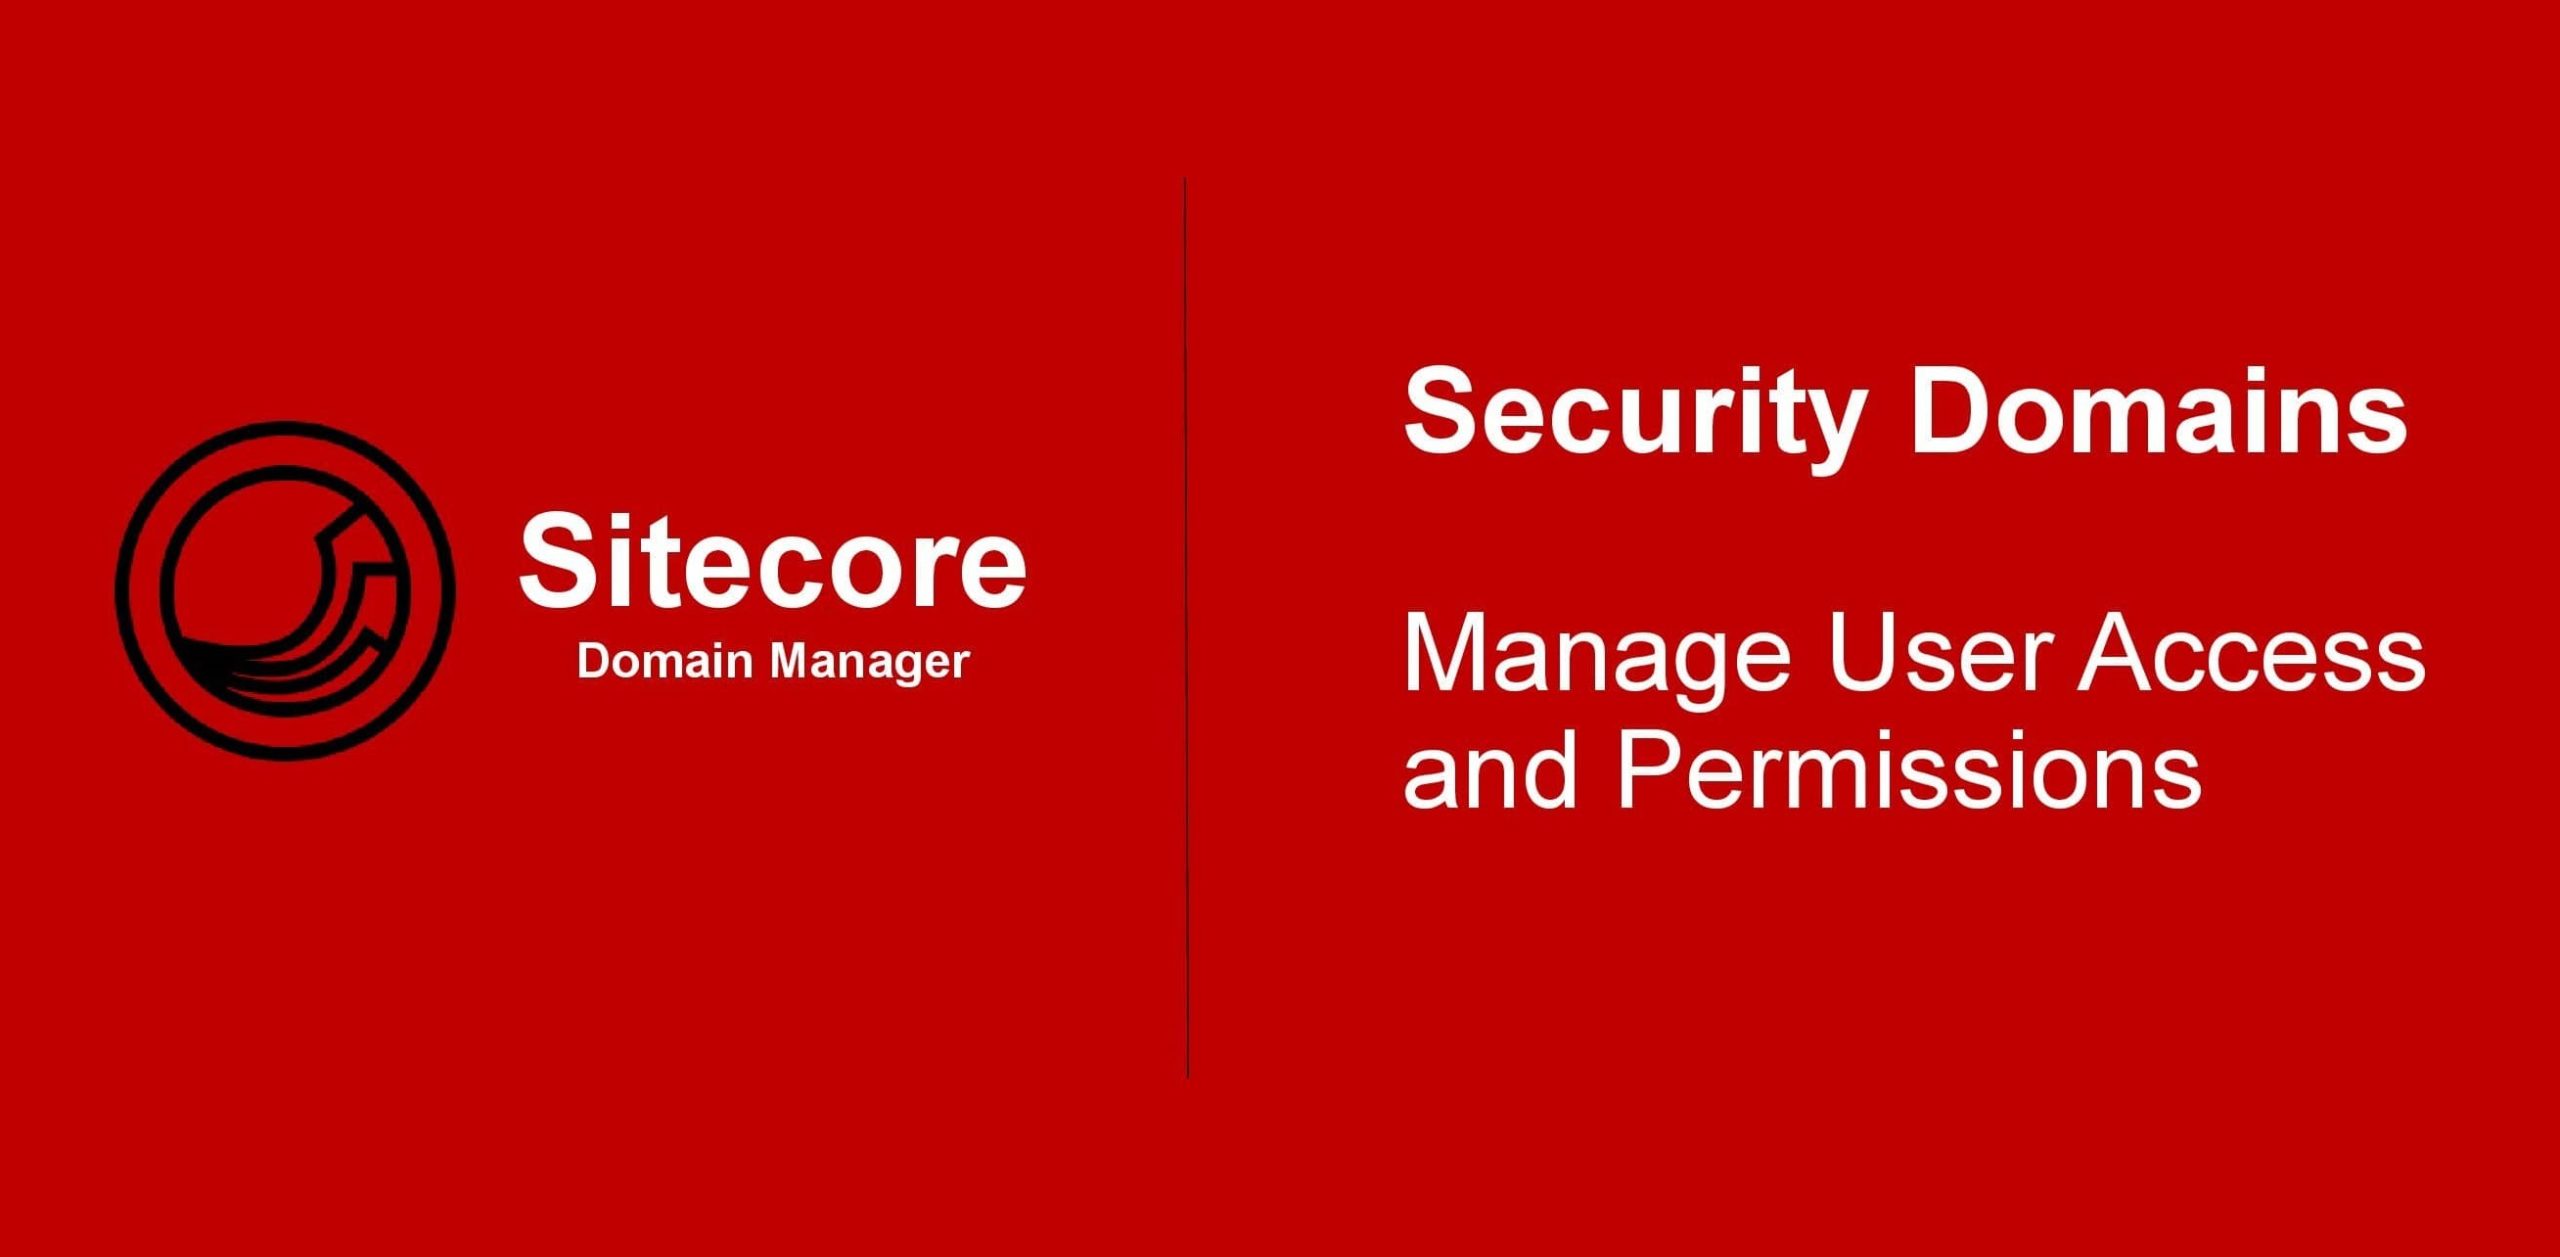 Sitecore Security Domains: A Guide to Managing User Access and Permissions